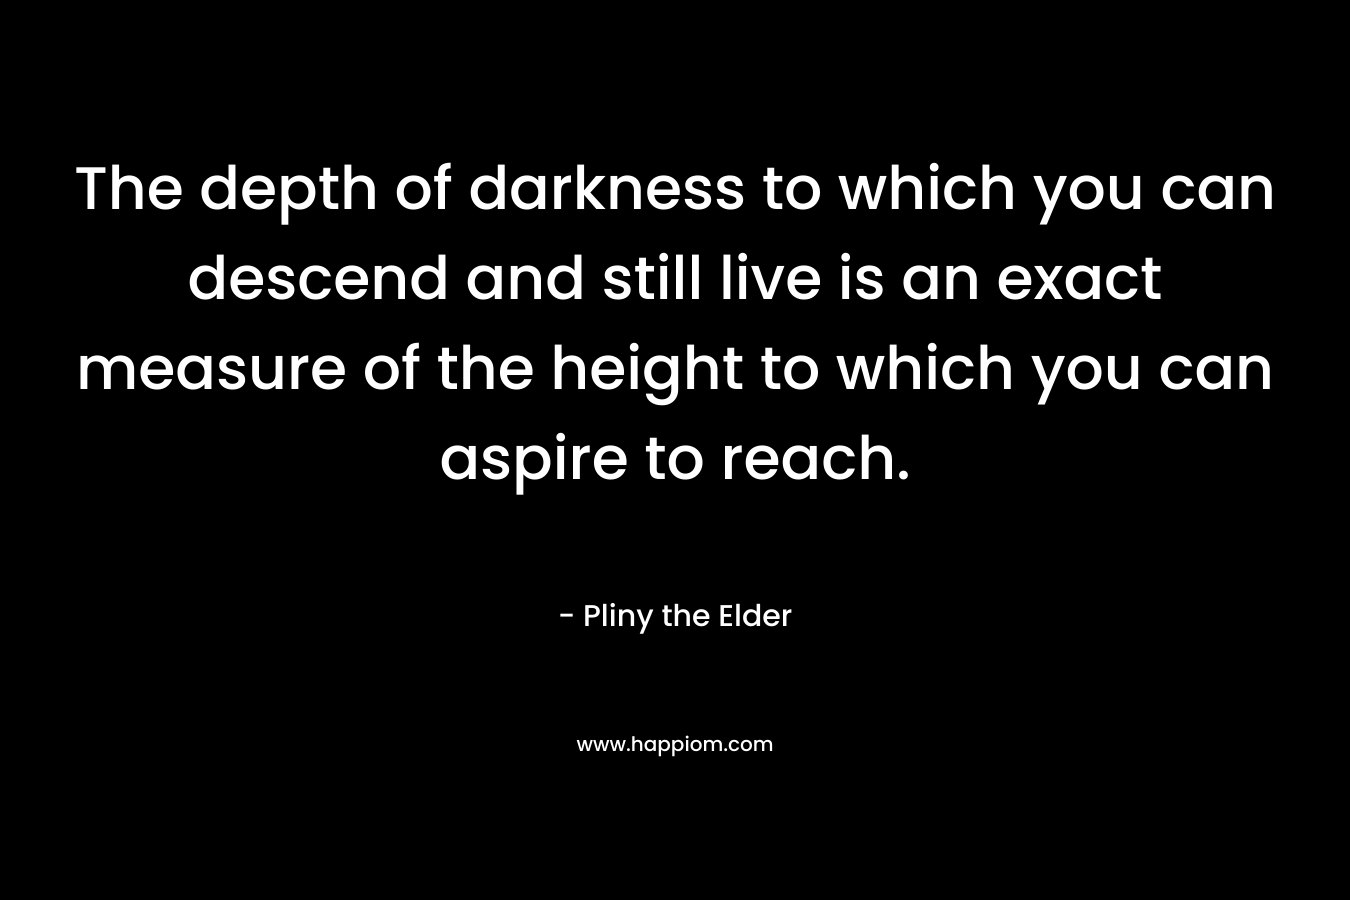 The depth of darkness to which you can descend and still live is an exact measure of the height to which you can aspire to reach. – Pliny the Elder